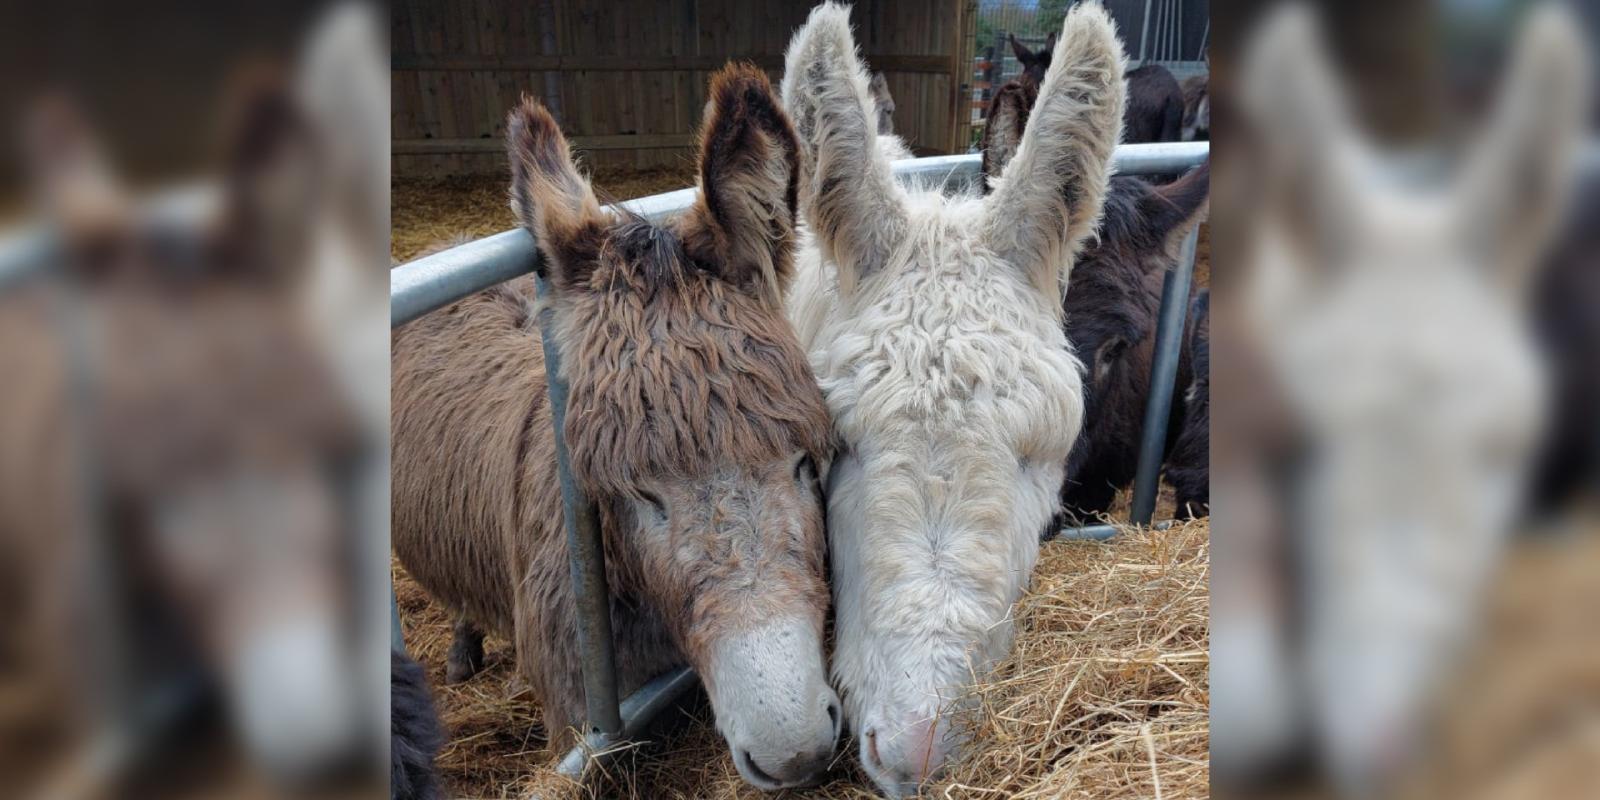 Freddie and his pal are doing well following their rescue 